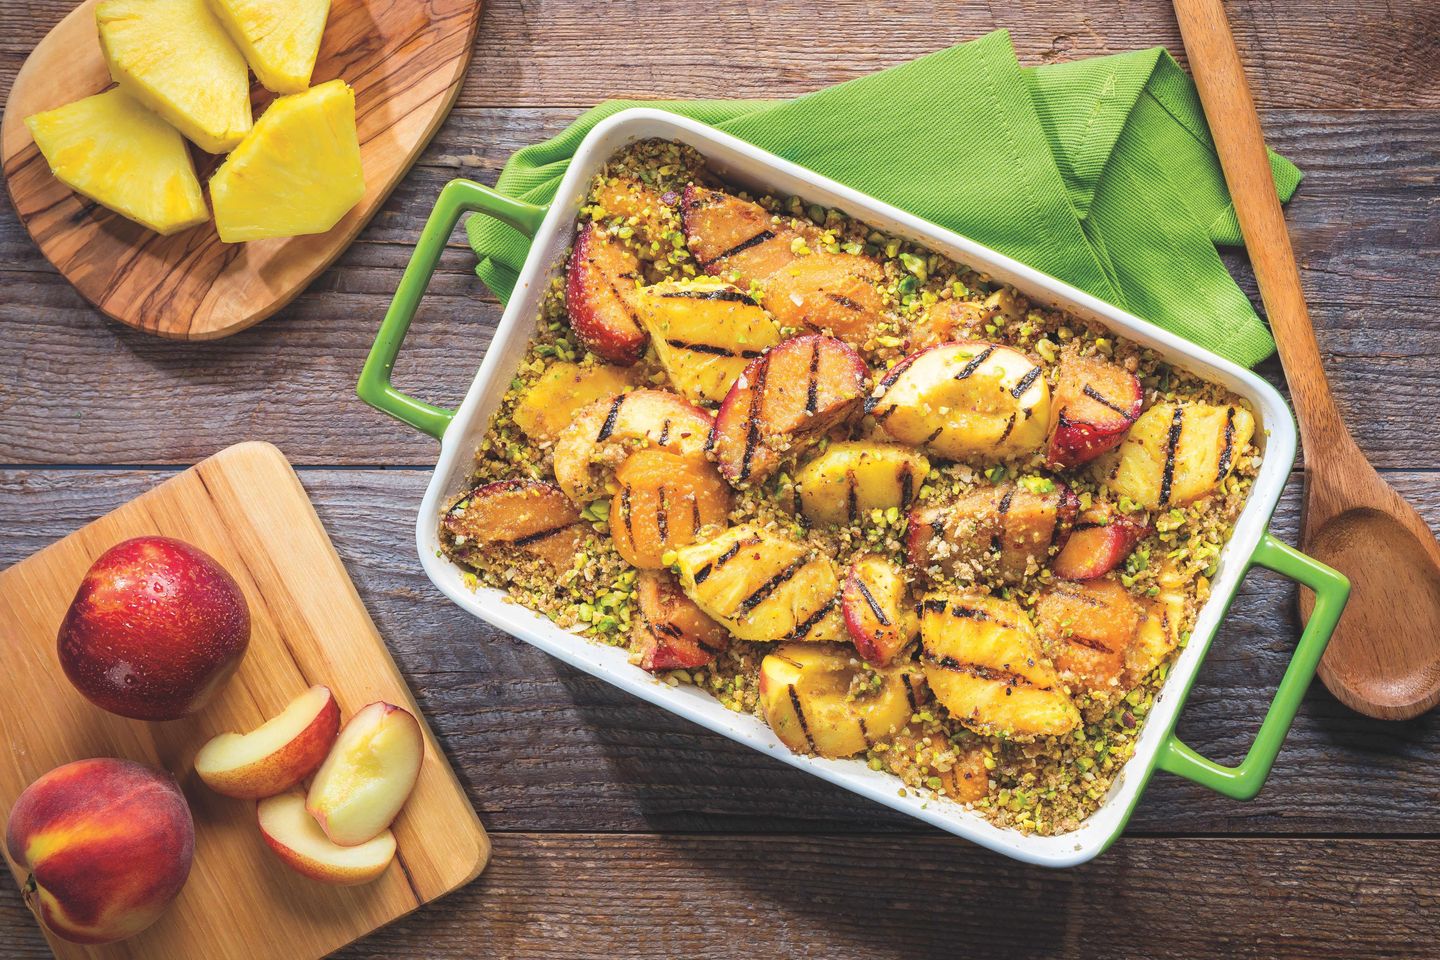 Grilled Pineapple & Stone Fruit Pistachio Crumble